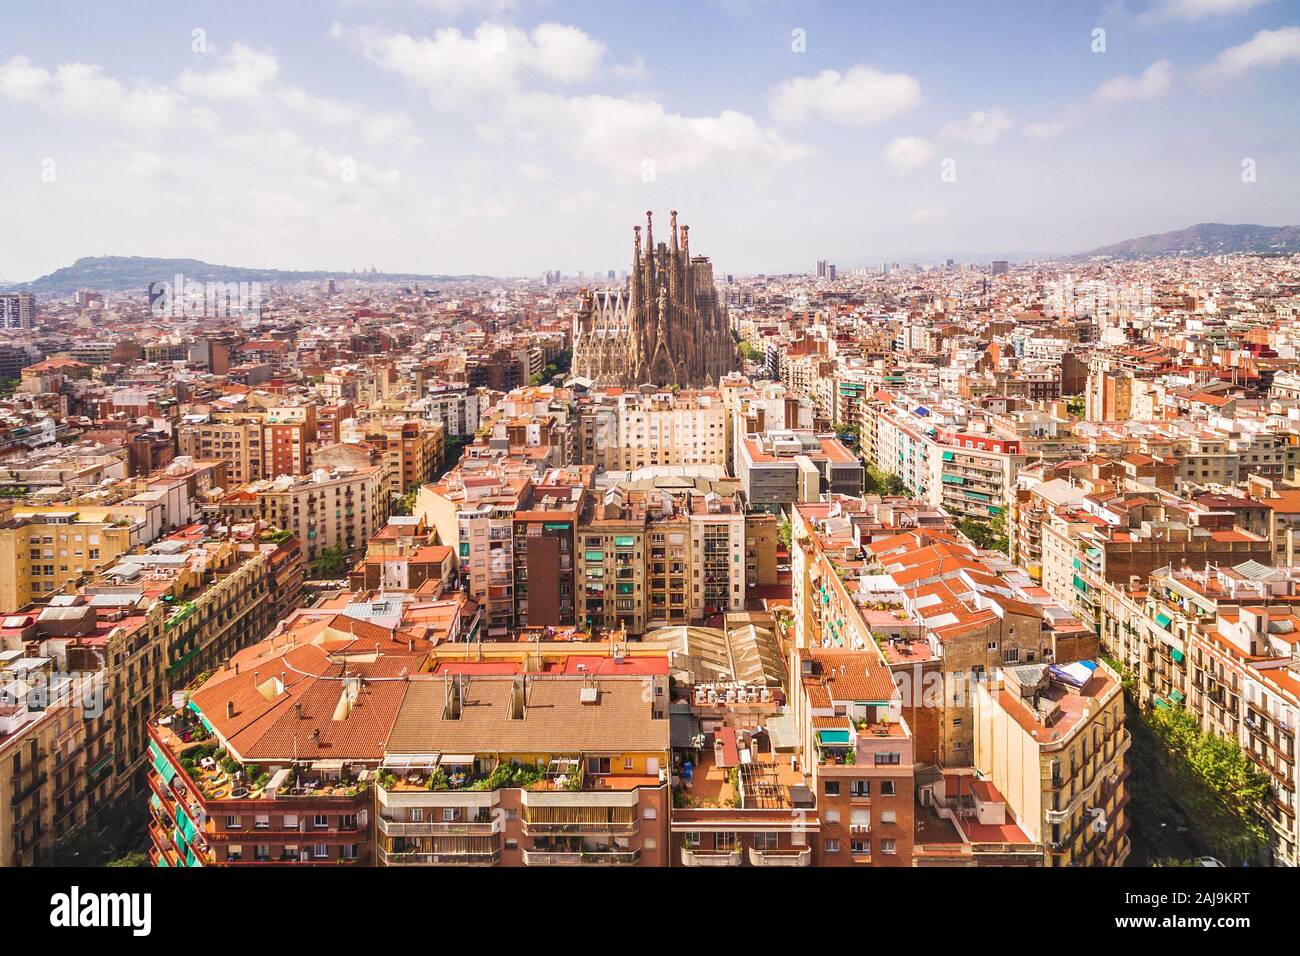 Aerial view of Barcelona, Spain. Stock Photo